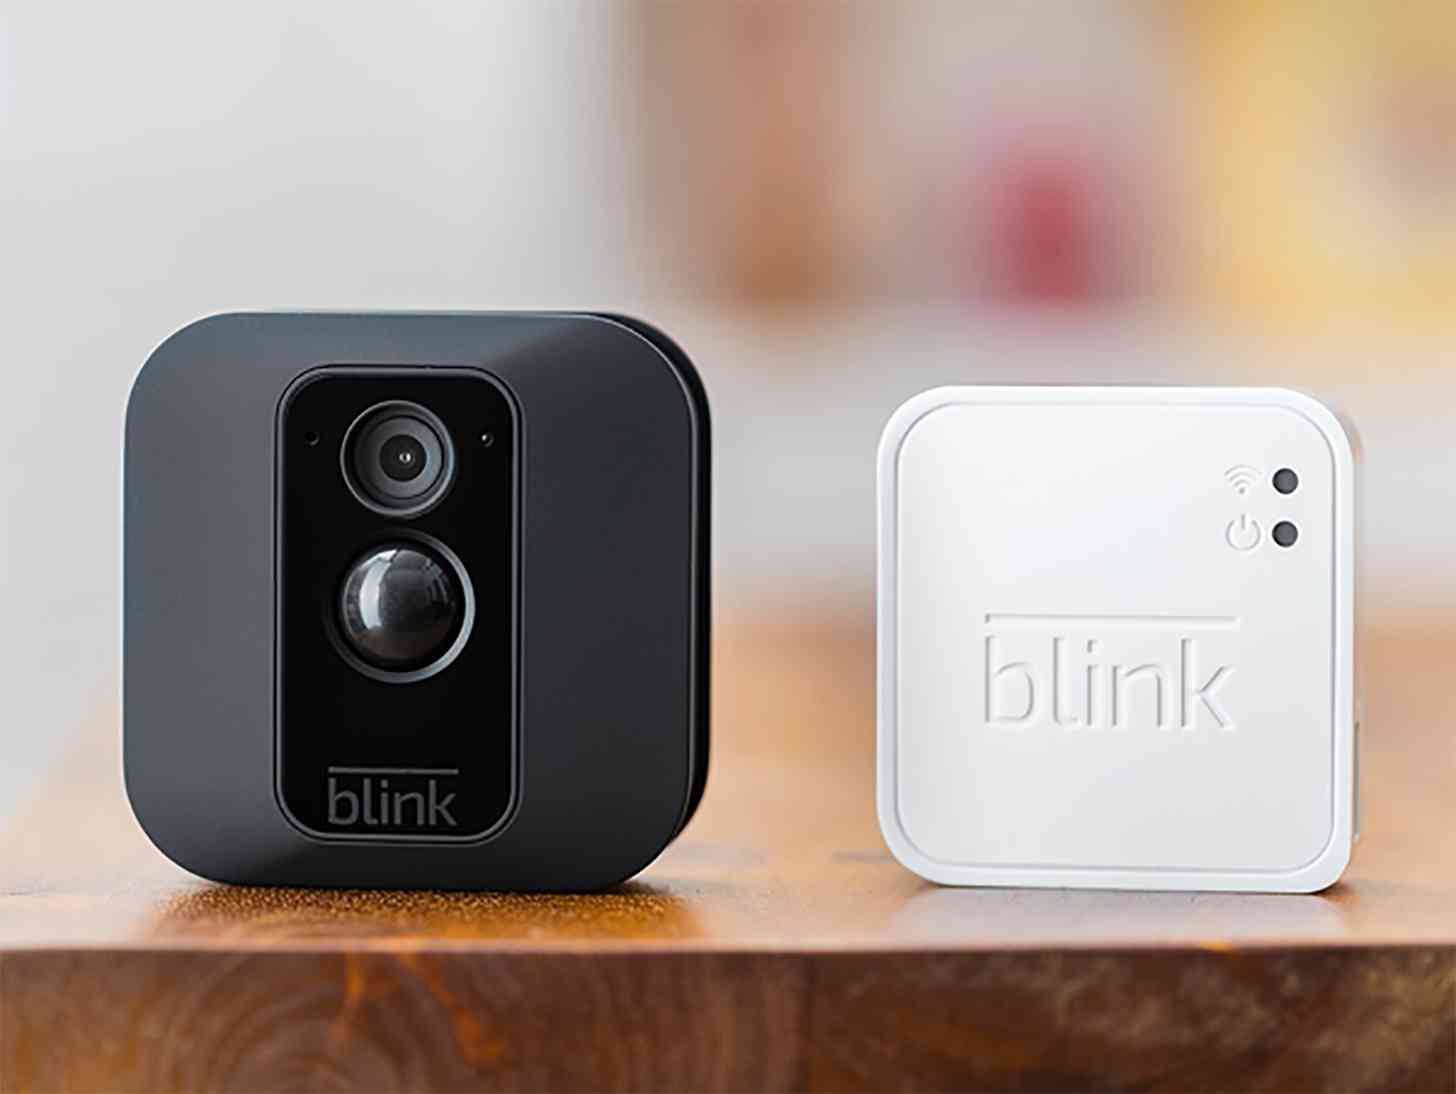 Blink connected home security cameras